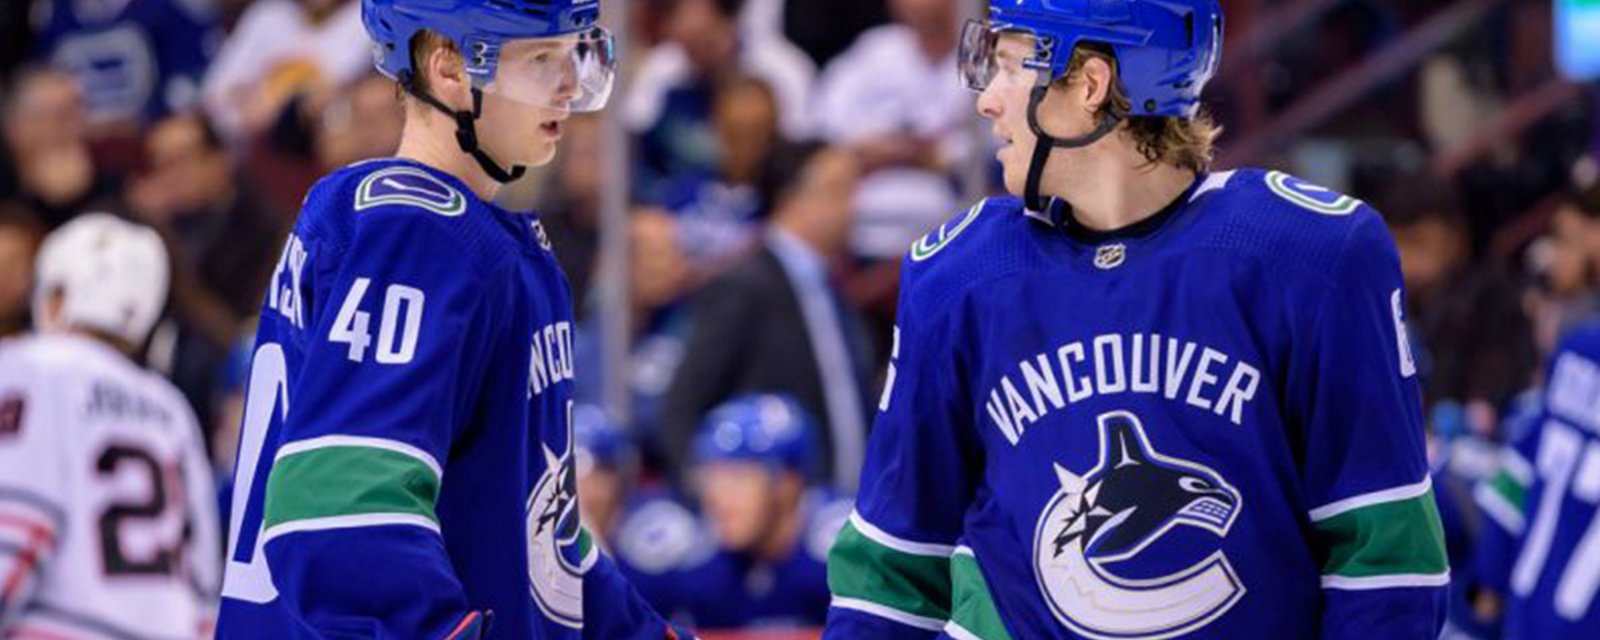 Report: Canucks lose another star to injury